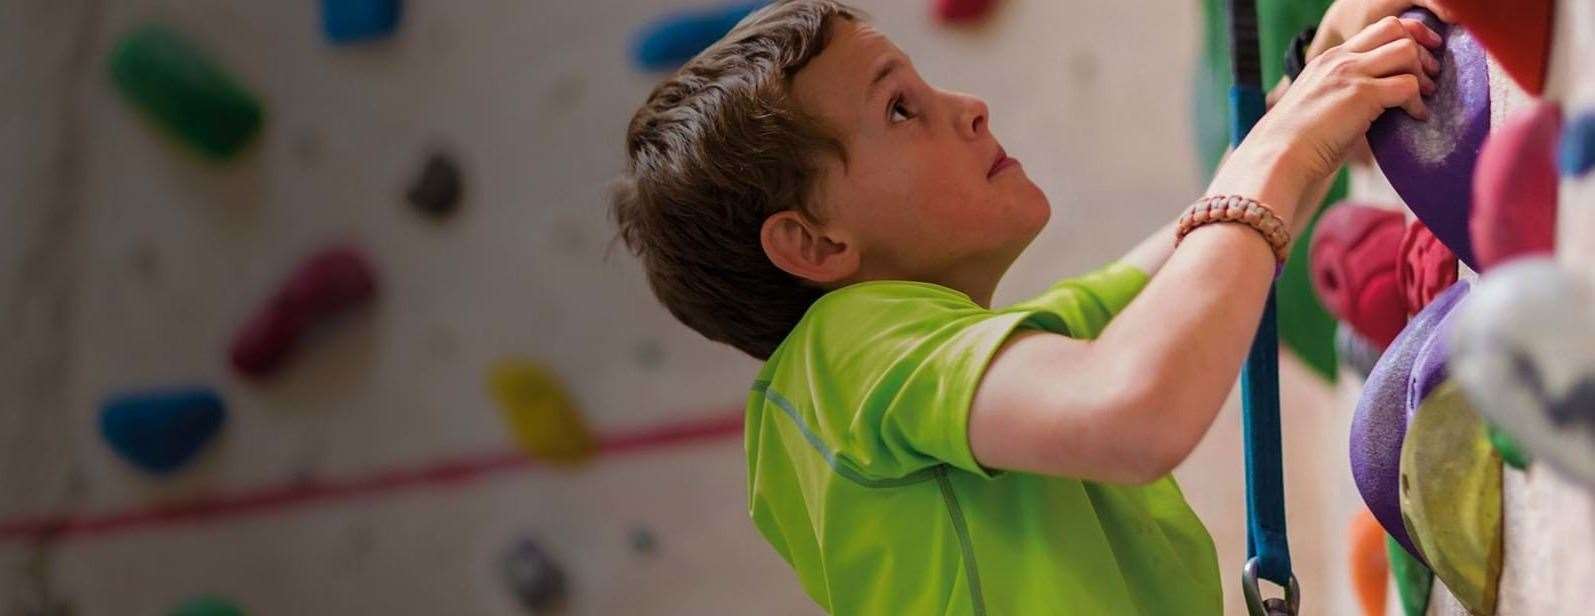 Dover District Leisure Centre's colourful arena for Clip ‘n Climb features 16 impressive fun-themed climbing experiences.